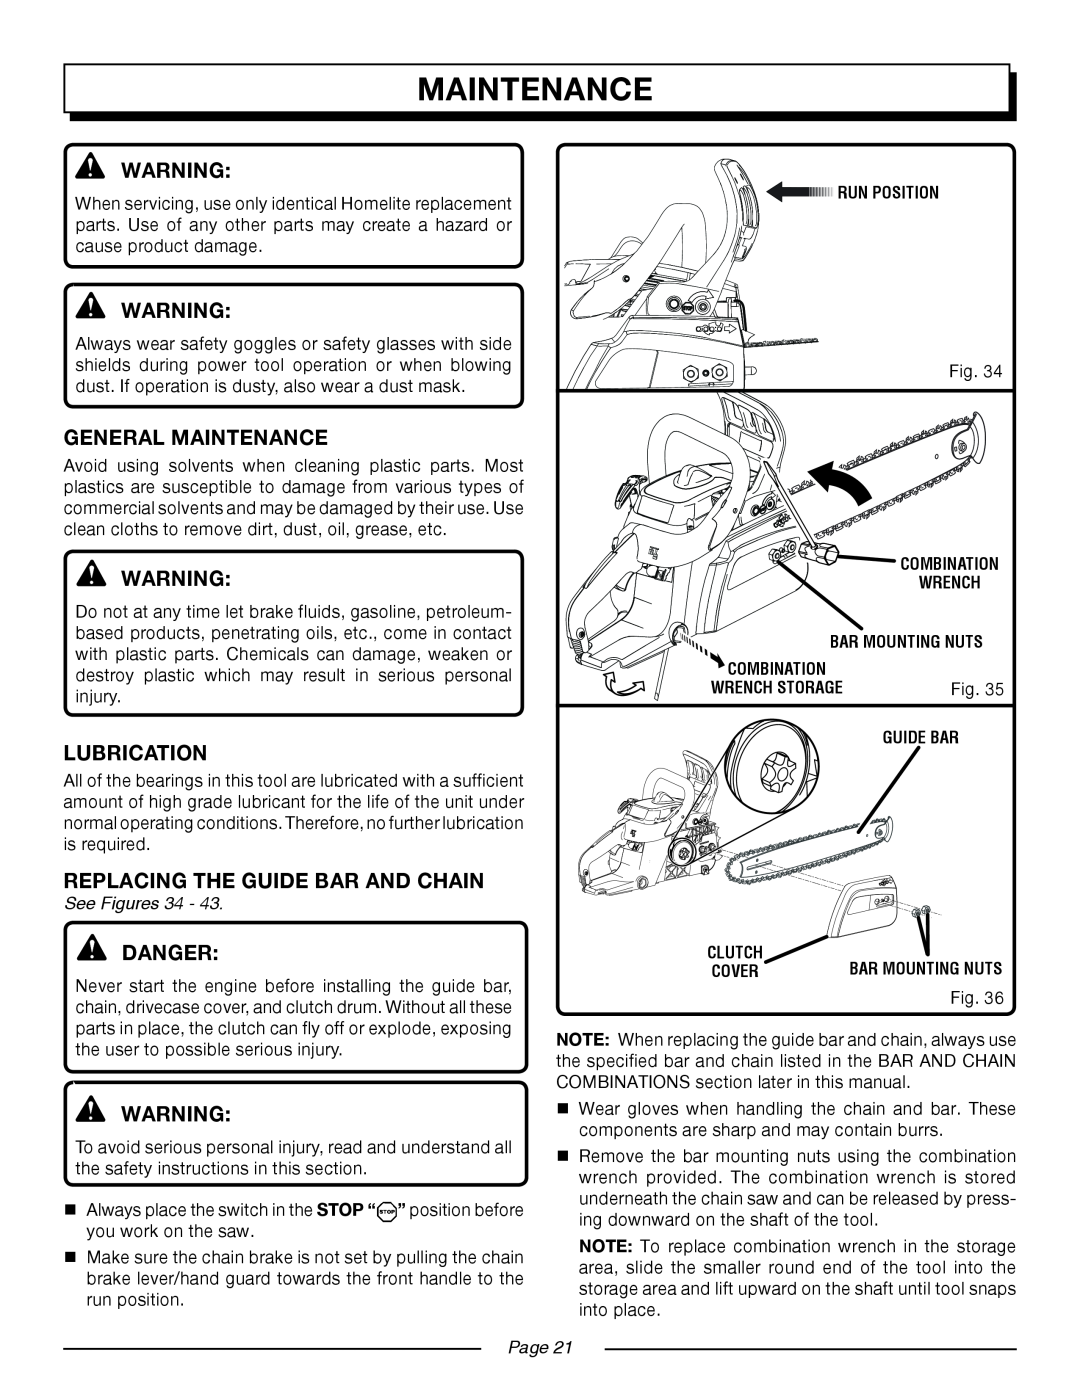 Homelite UT10552 maintenance, General Maintenance, Lubrication, REPLACING THE guide BAR AND CHAIN, Danger, See Figures 34 